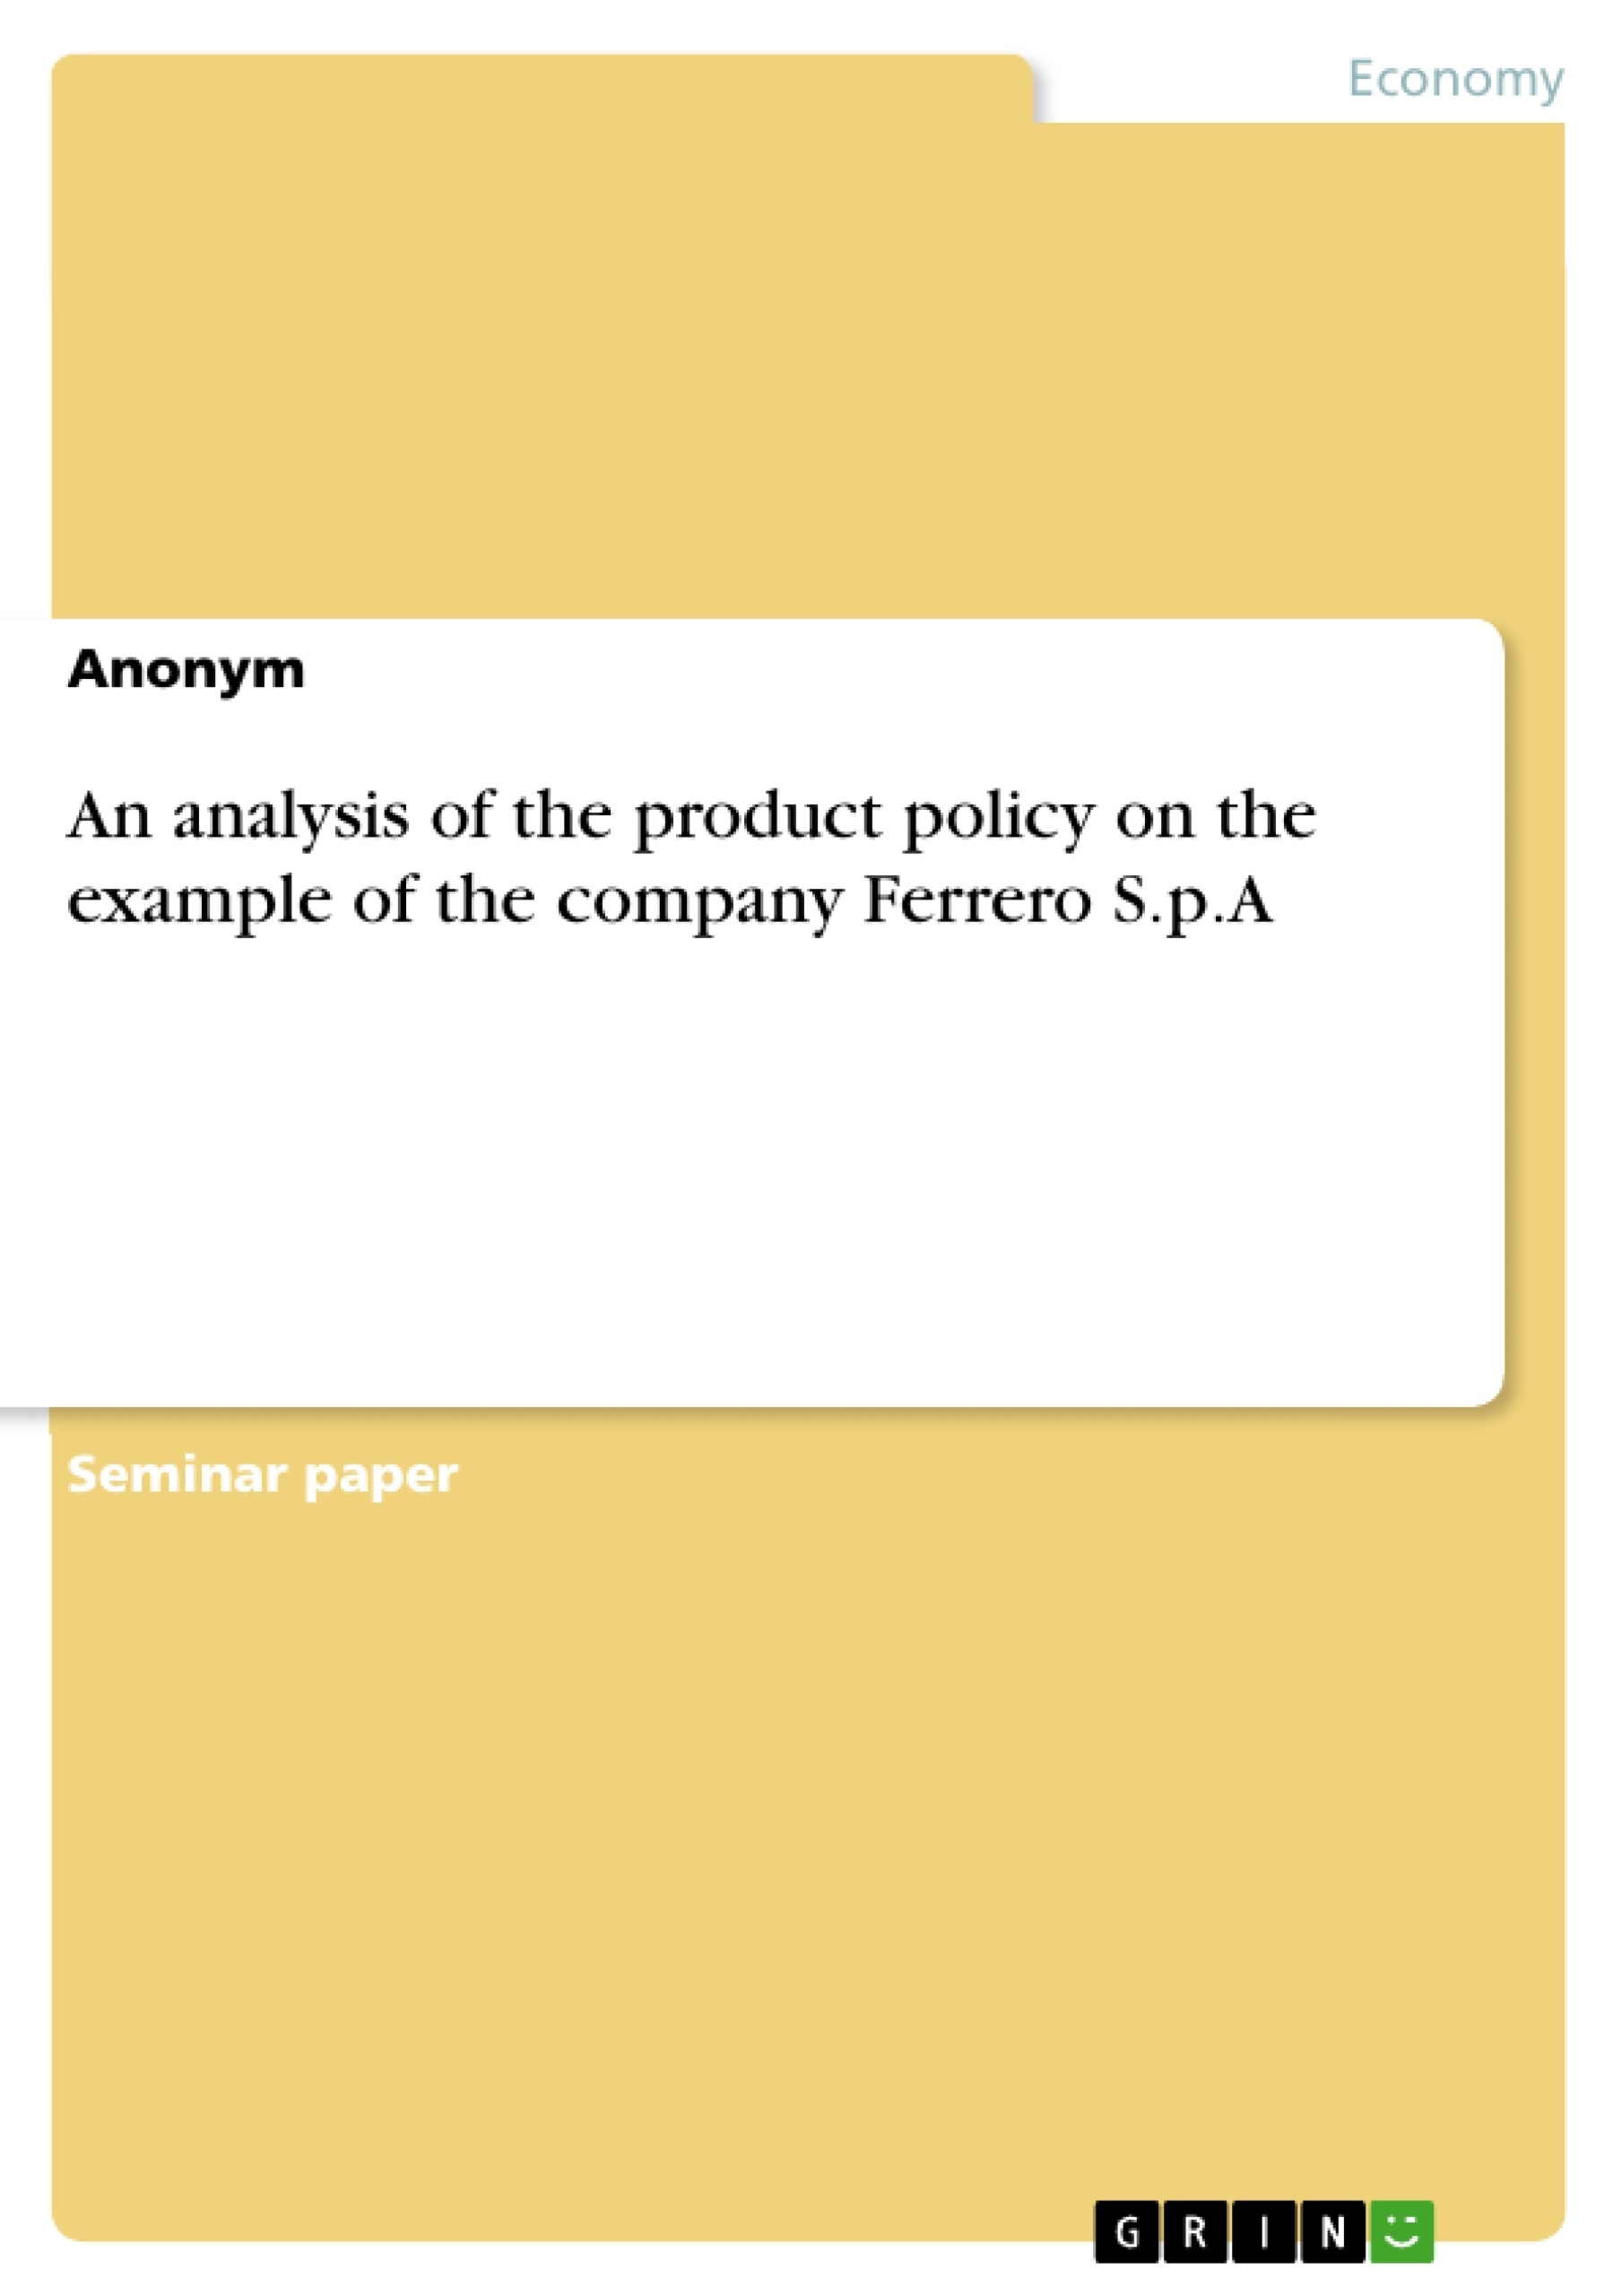 Title: An analysis of the product policy on the example of the company Ferrero S.p.A